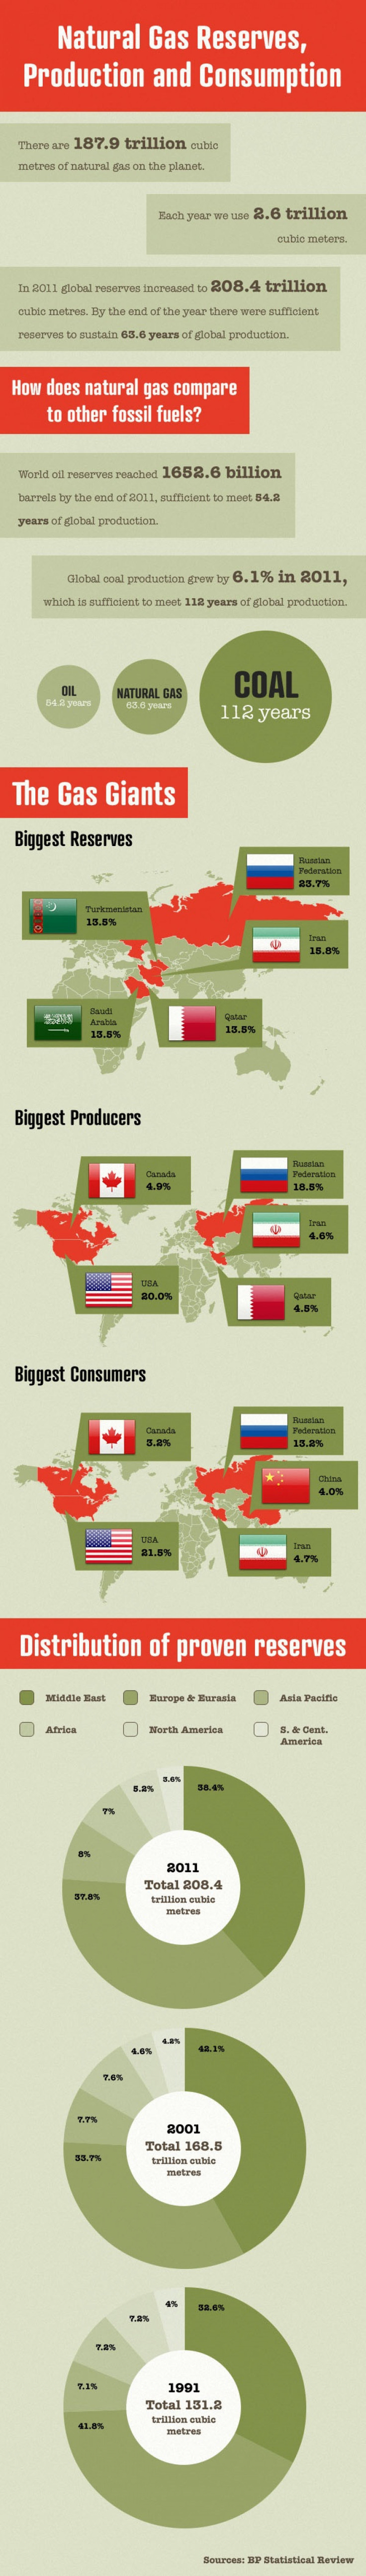 Natural-Gas-Reserves-Production-and-Consumption-Infographic